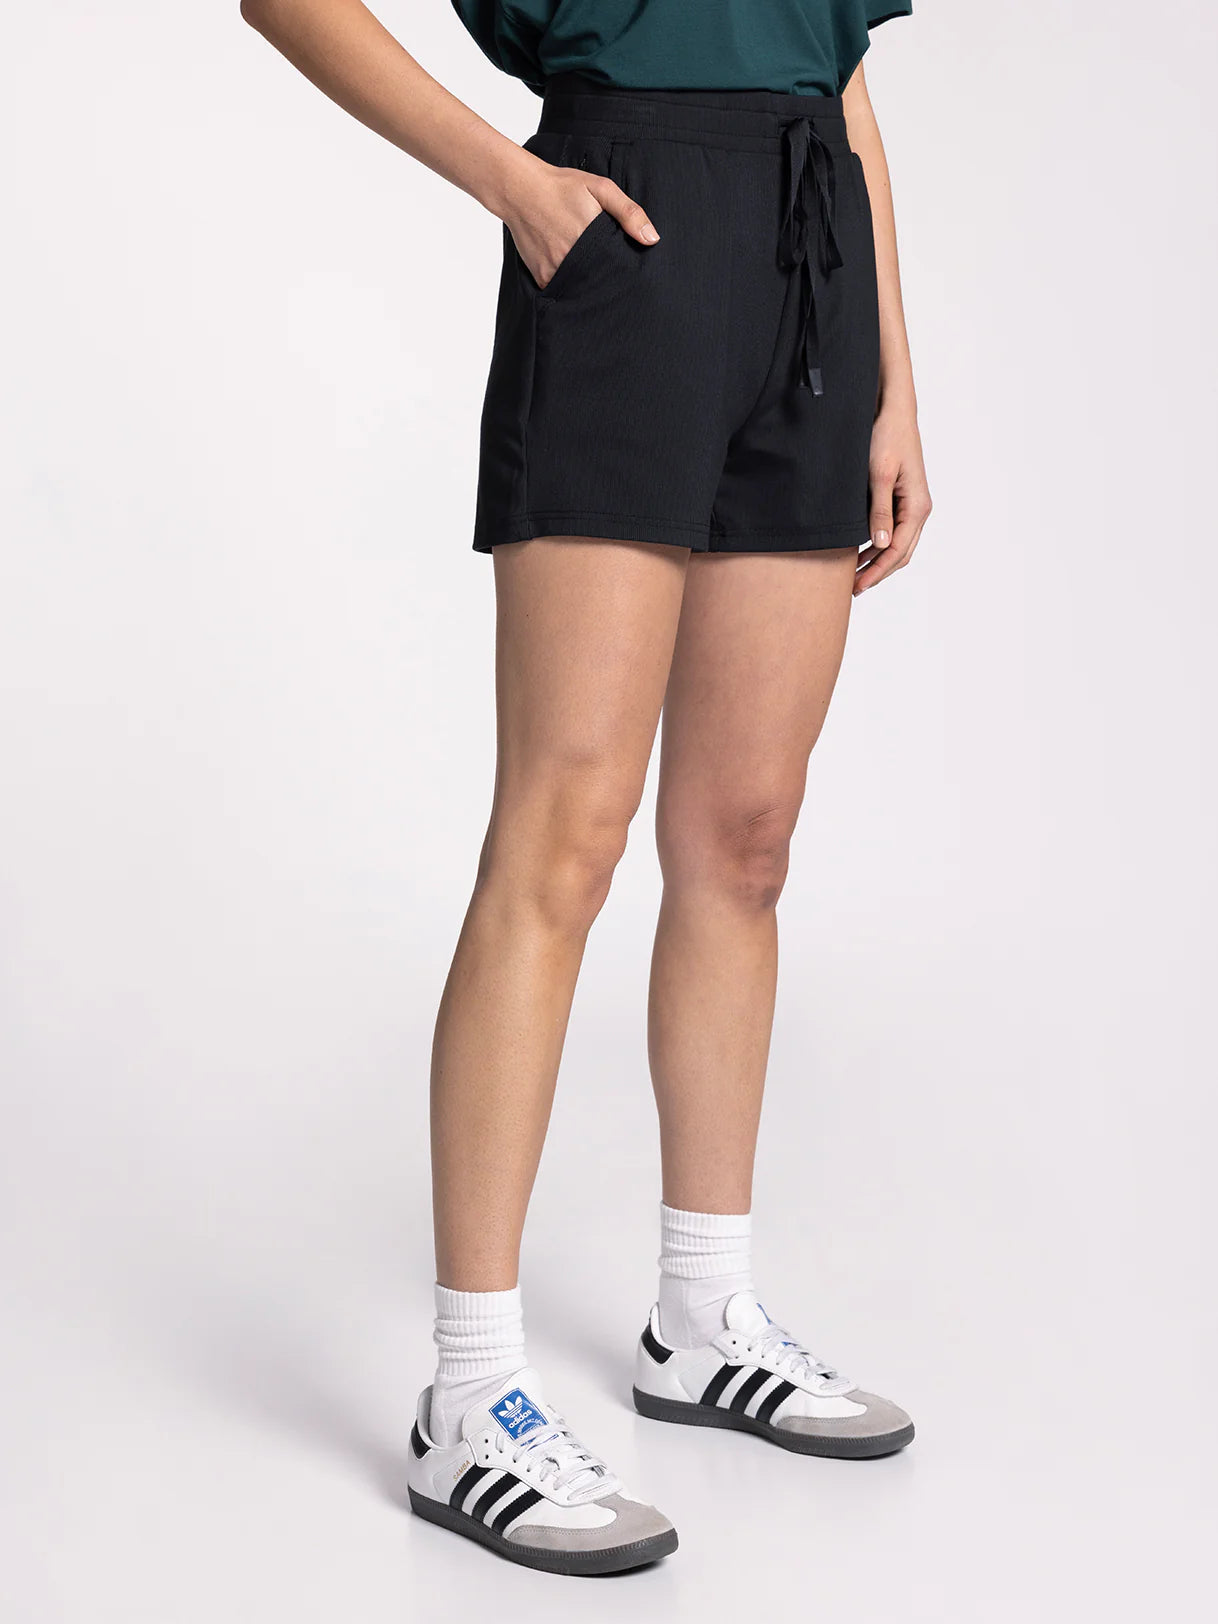 On The Go Shorts - FINAL SALE